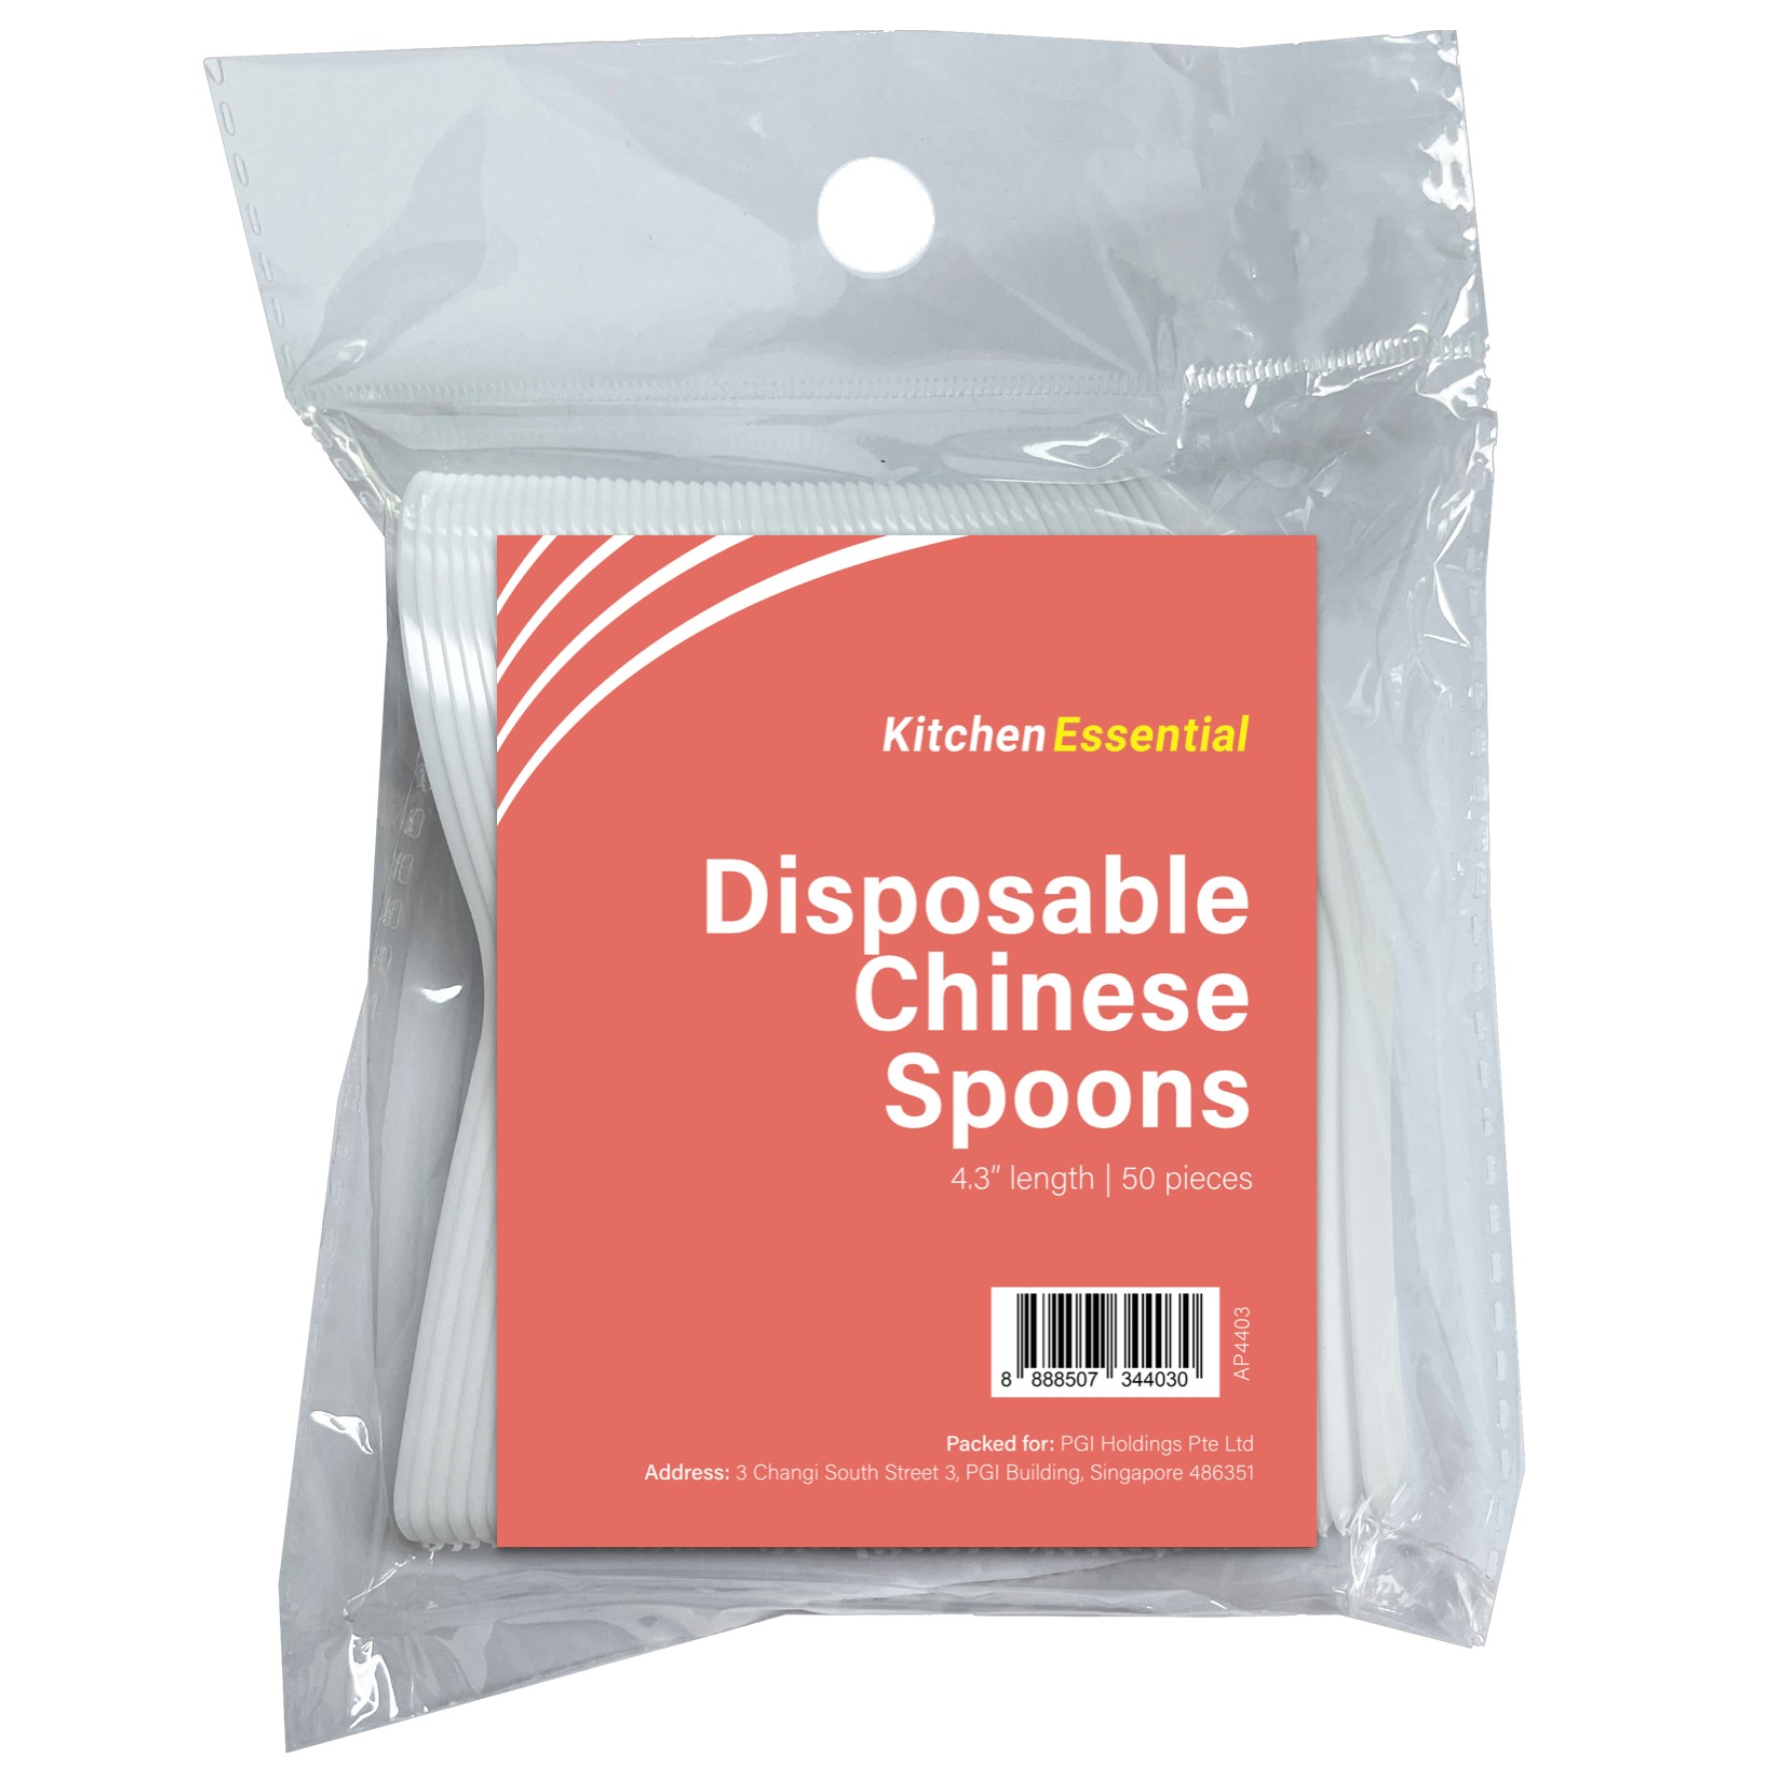 KITCHEN ESSENTIAL Plastic Chinese Spoon 50PC/PACK 4.3" LENGTH